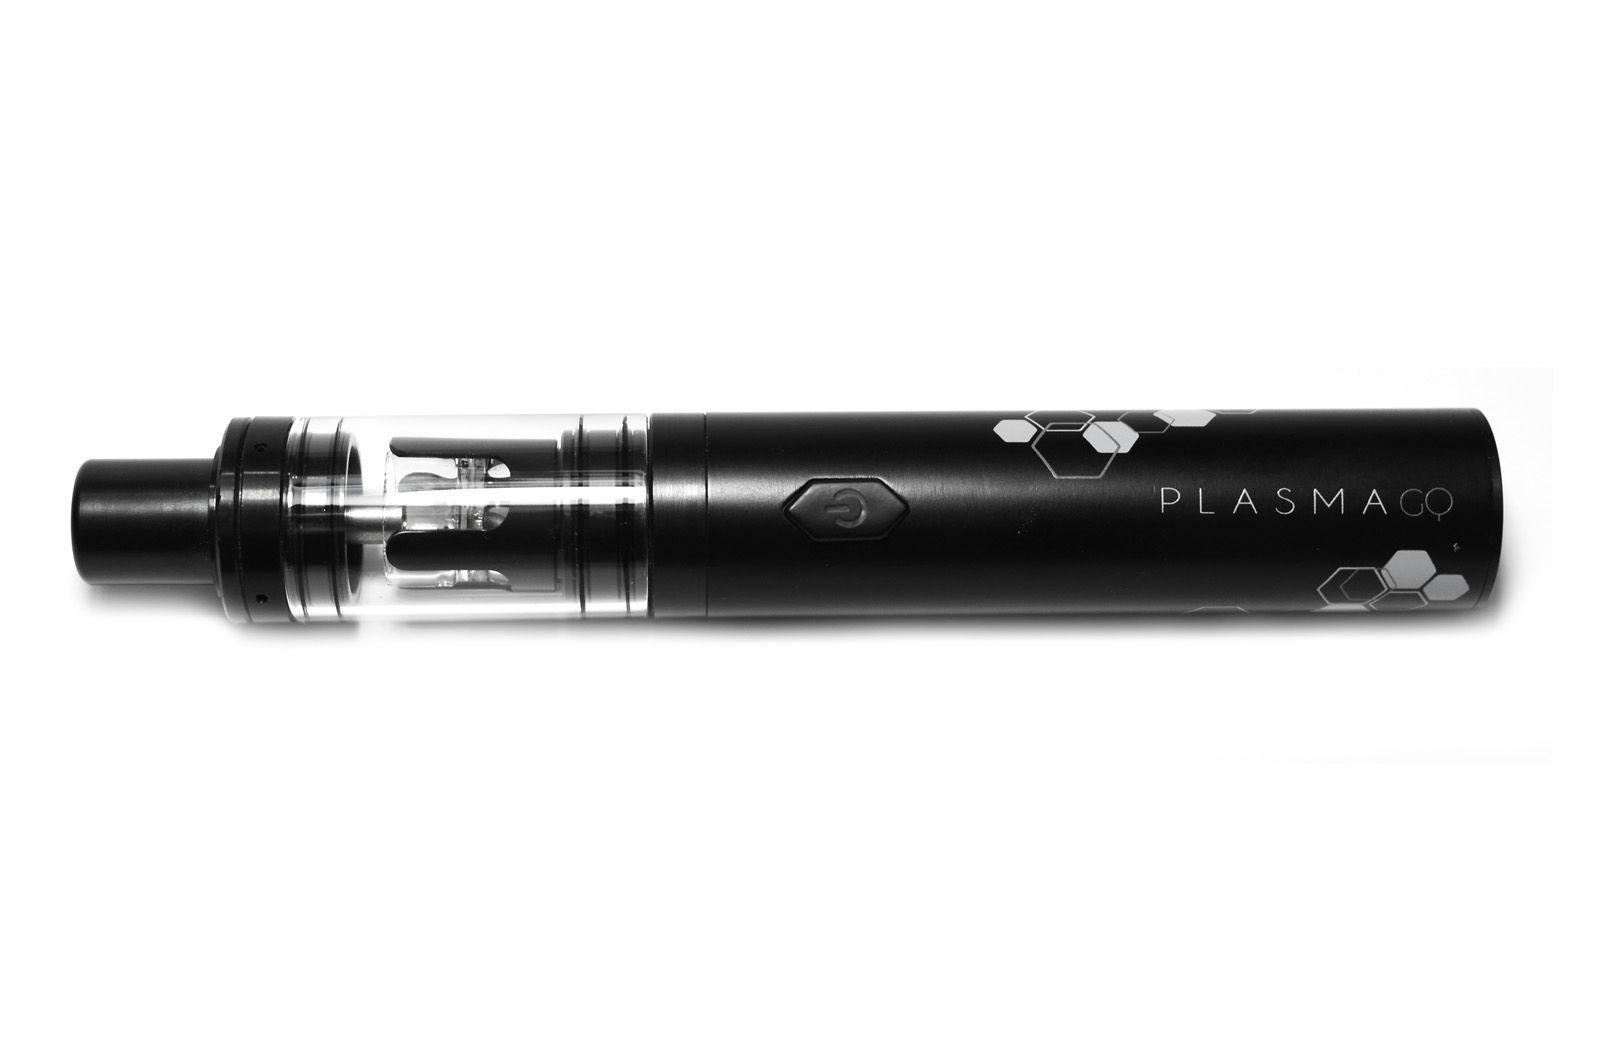 How to Use the GQ Plasma Dab Pen.